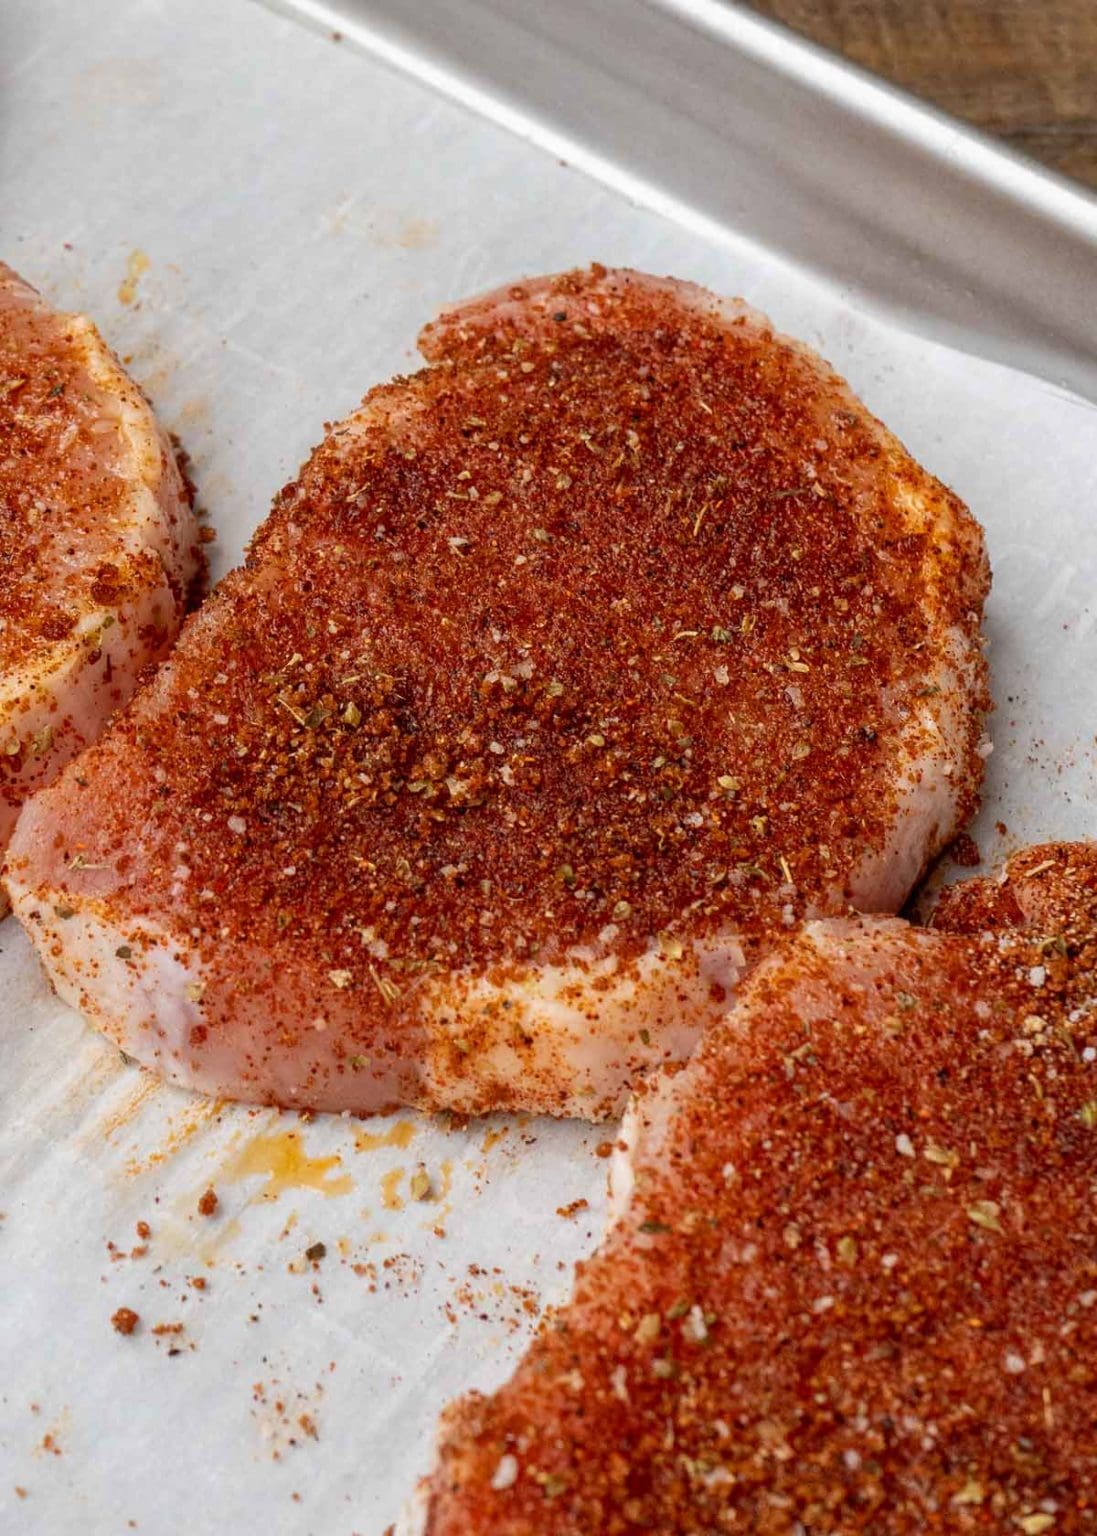 Perfect Baked Pork Chops - The Best Keto Recipes